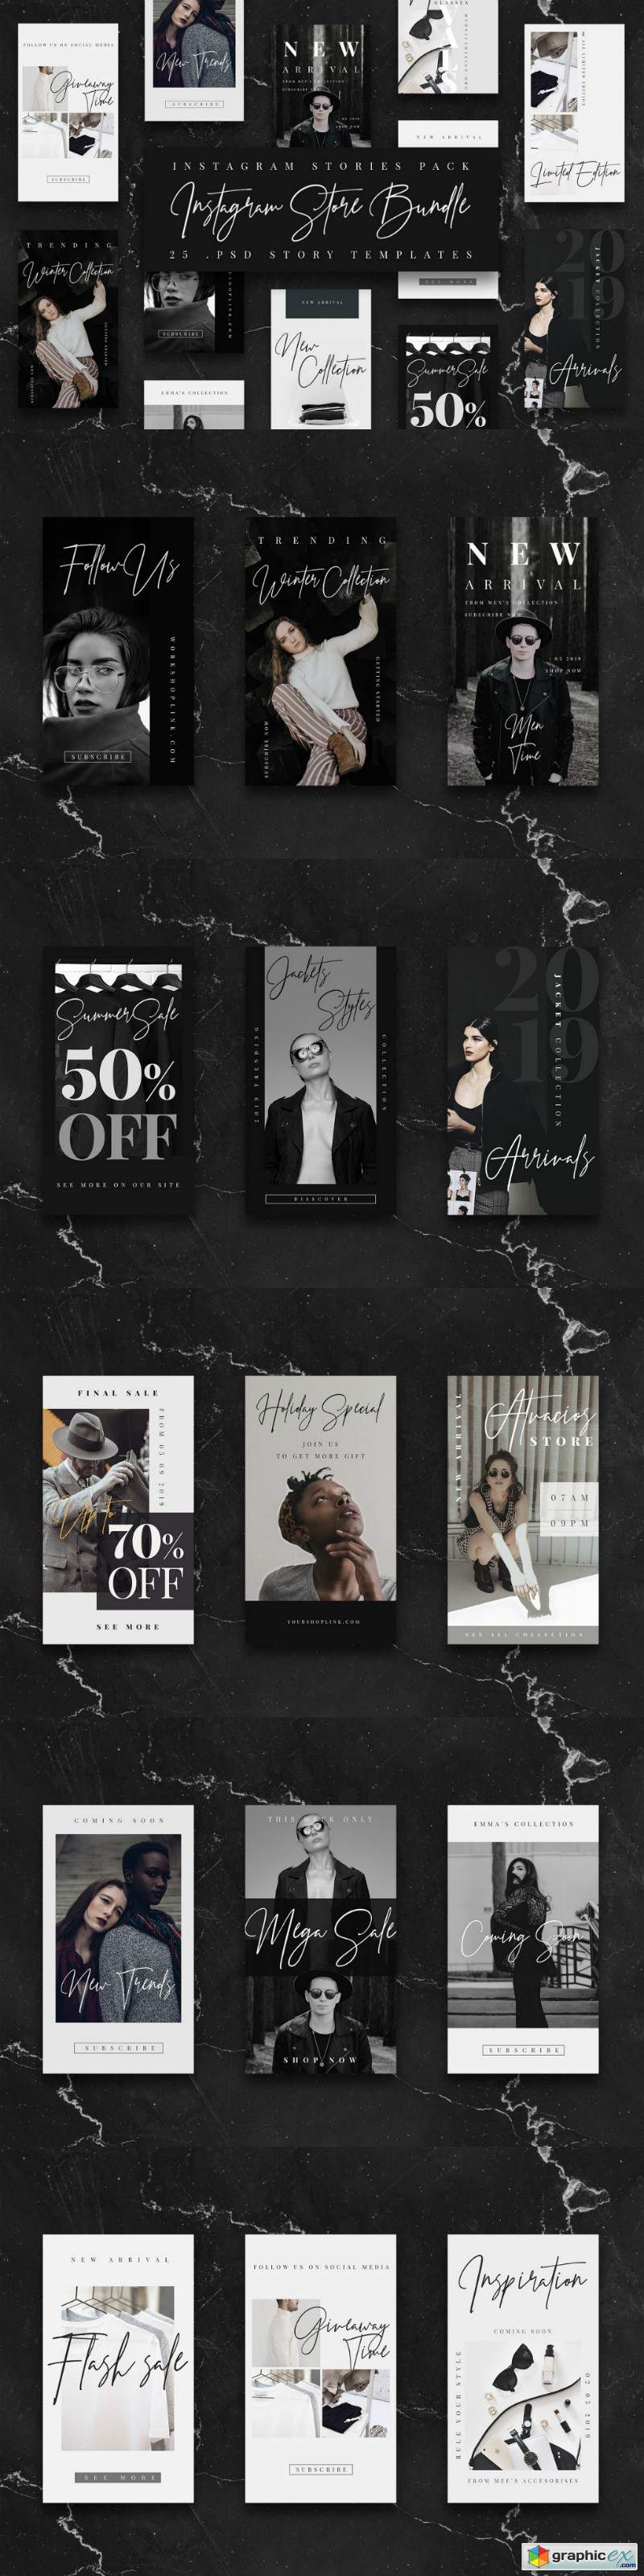 BW Instagram Stories Template Store